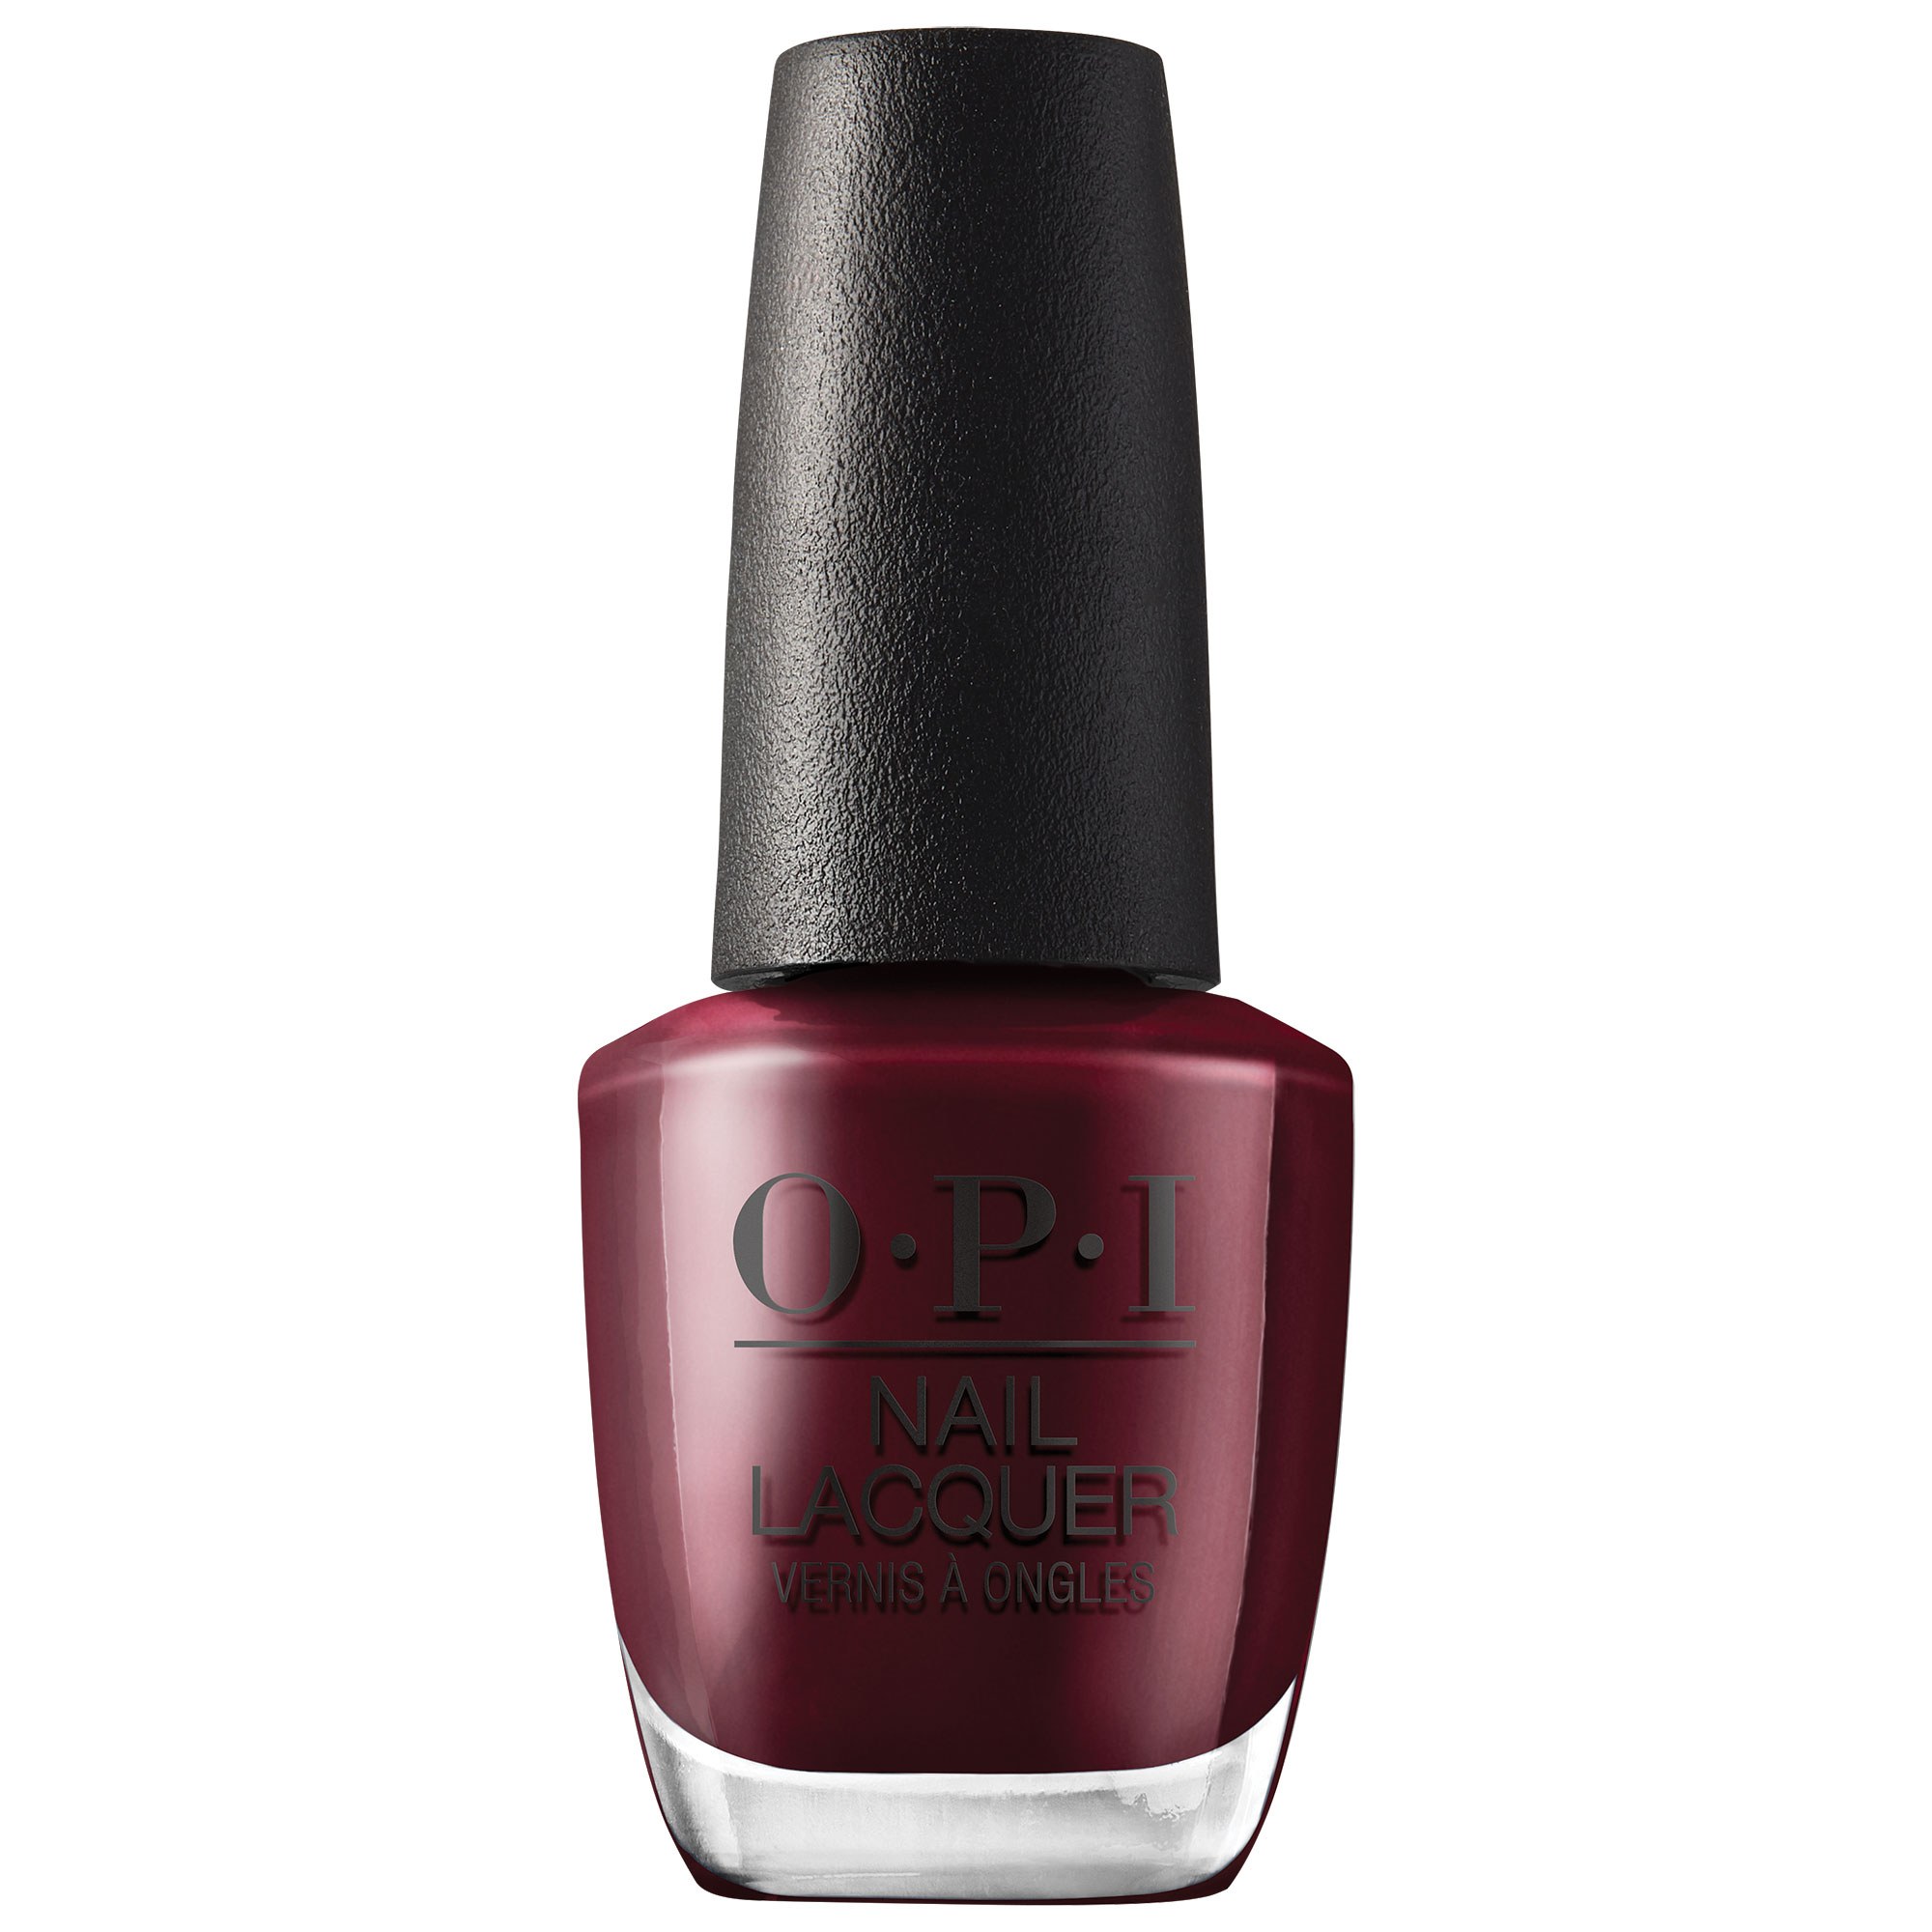 OPI Muse of Milan - Complimentary Wine 0.5oz